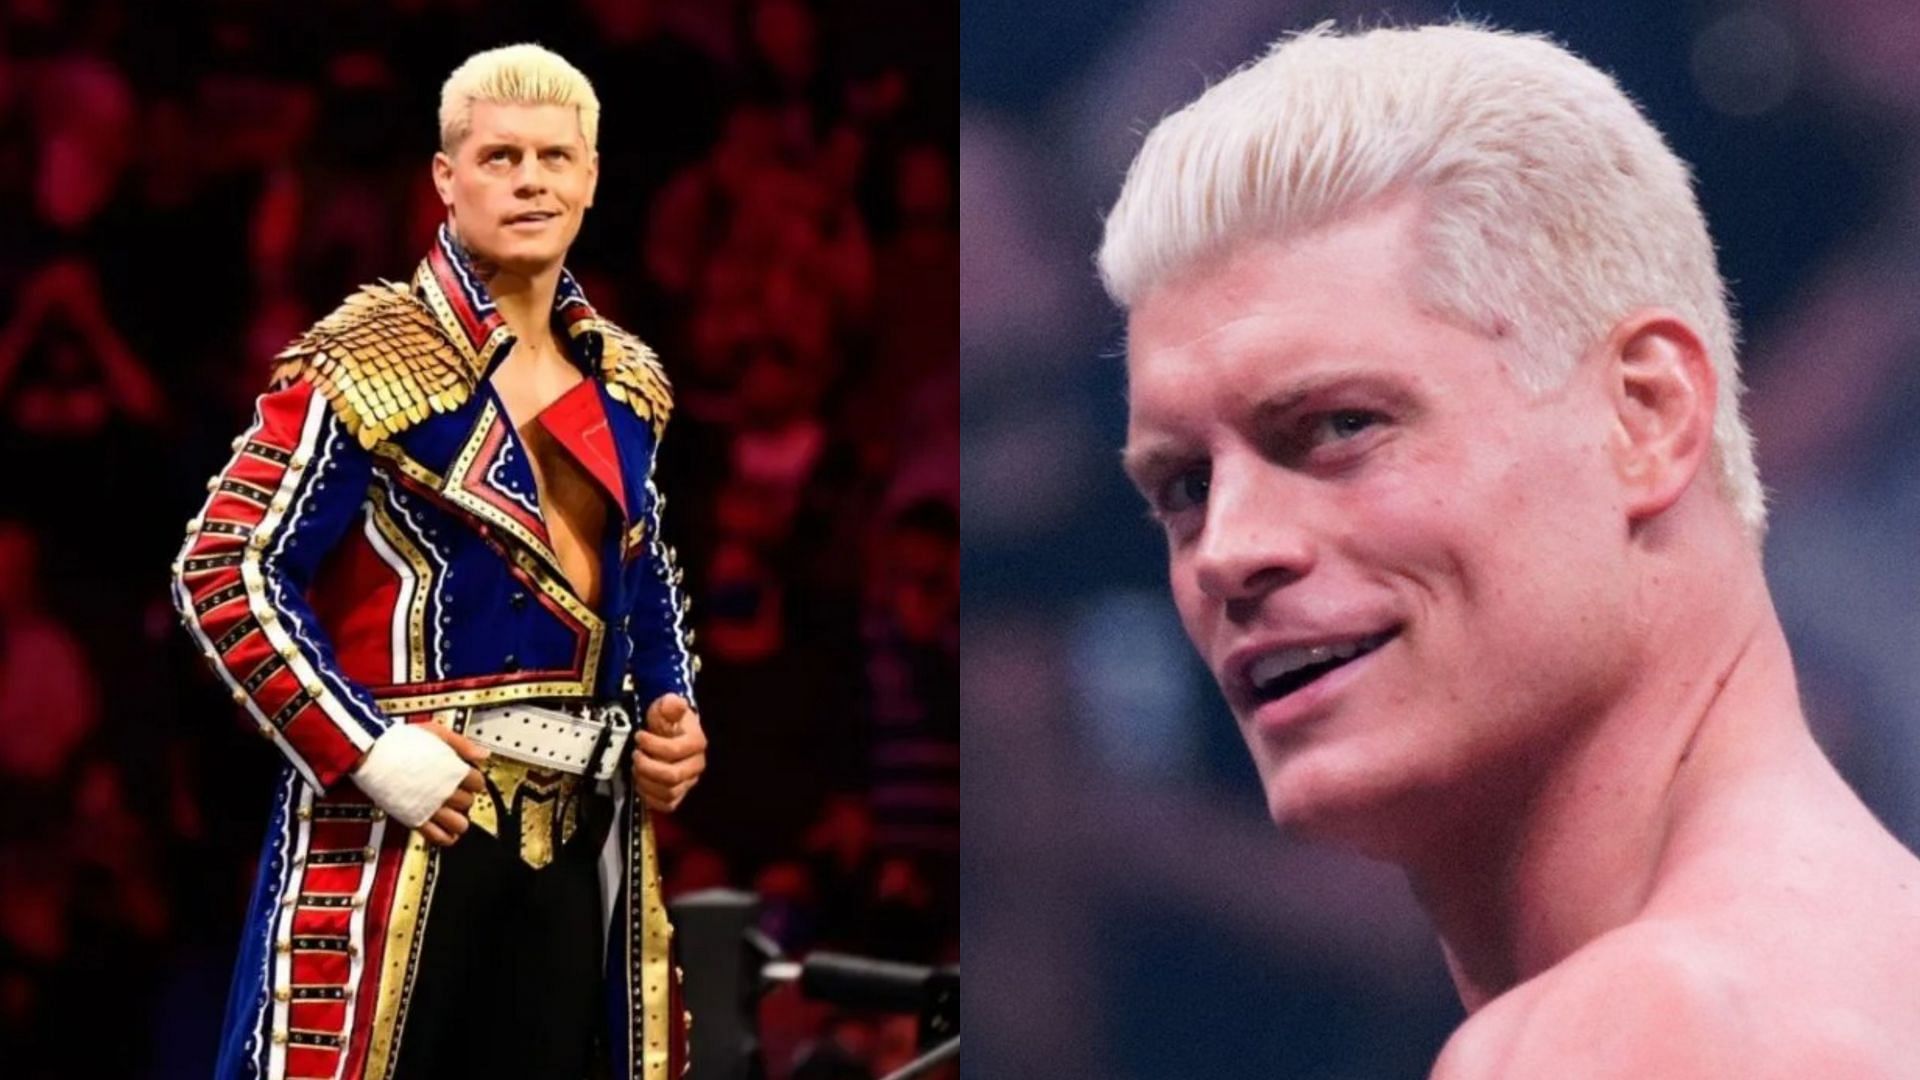 Cody Rhodes lost to Roman Reigns at WWE WrestleMania 39